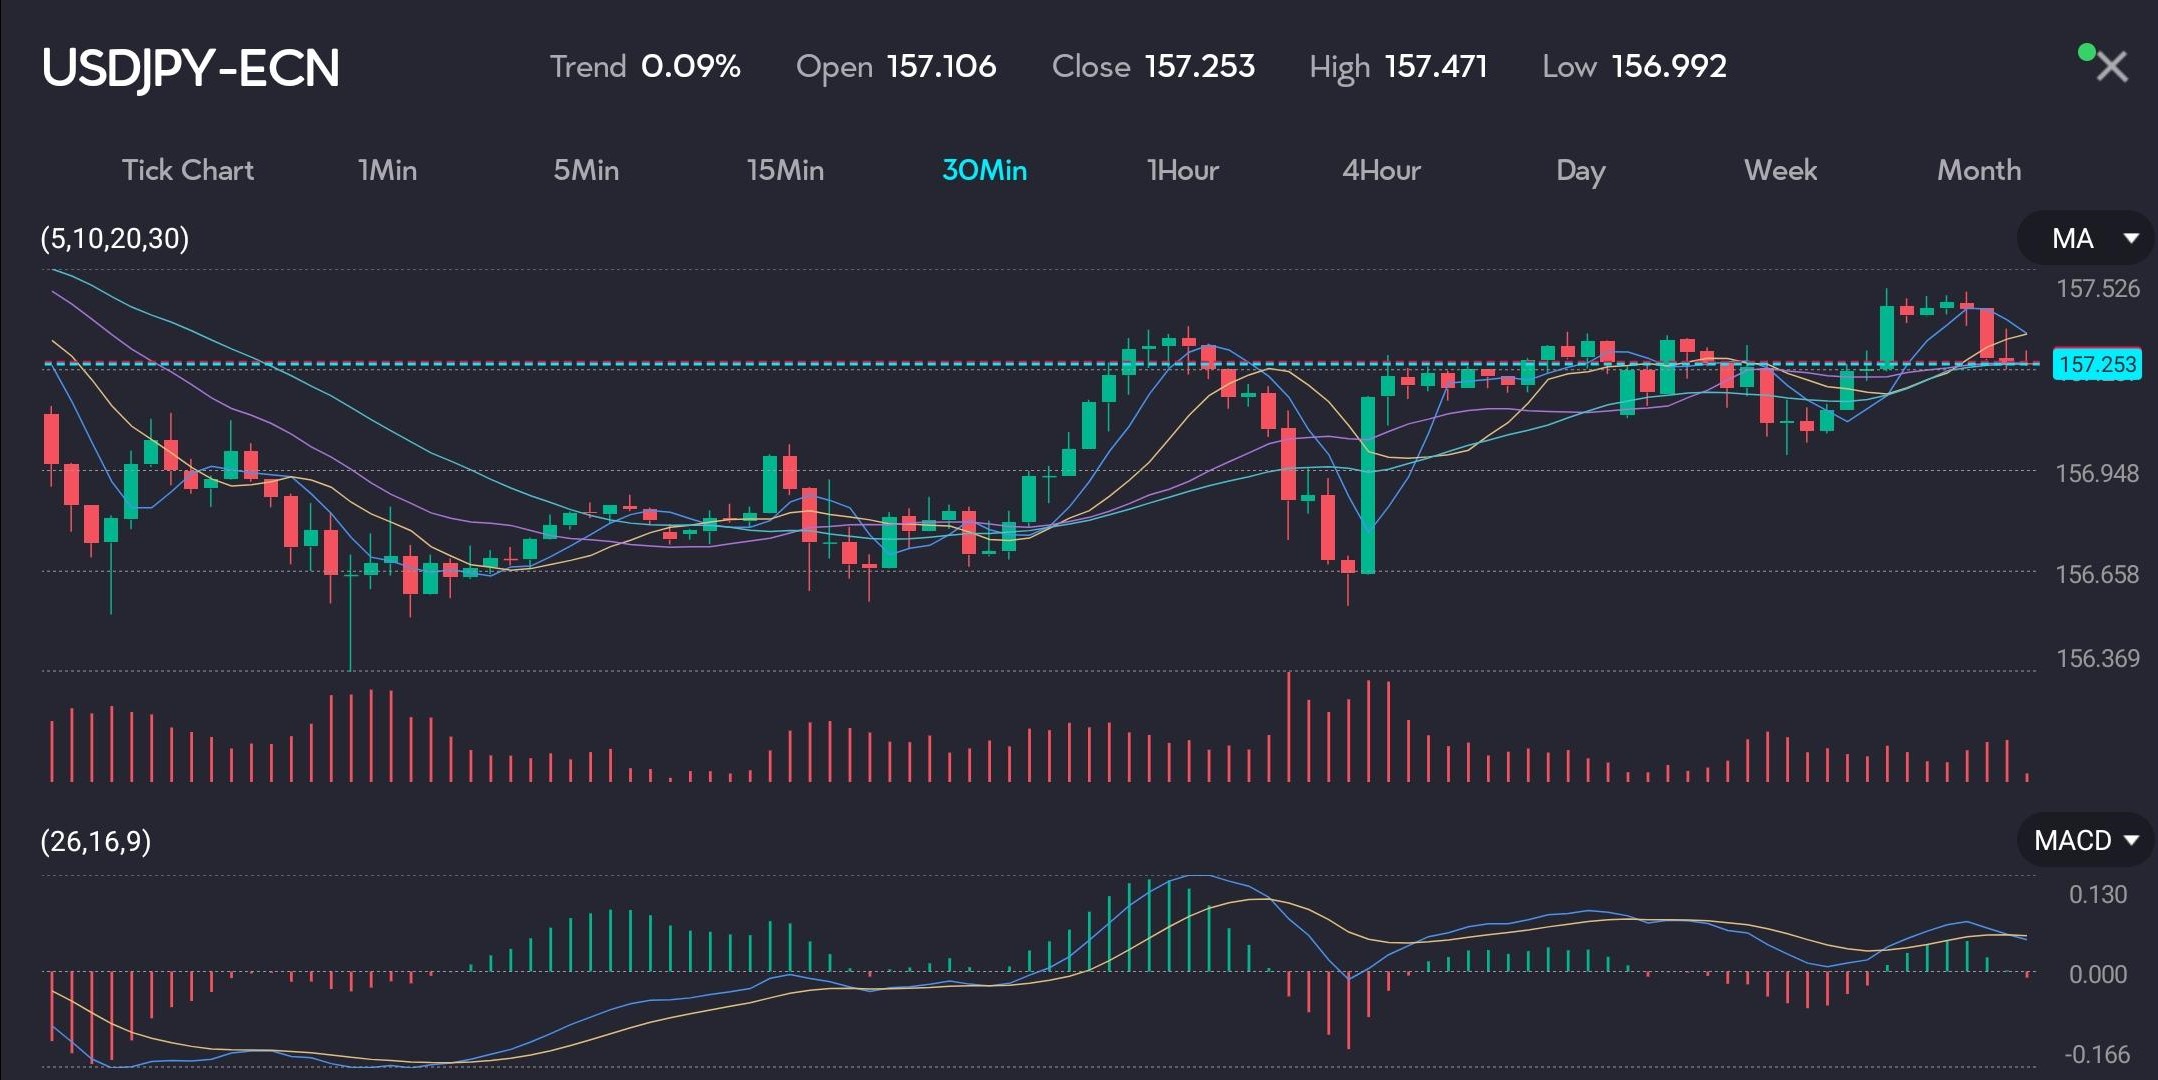 
USD/JPY chart displaying a 30-minute timeframe with a trend of 0.09%. The chart shows the opening price at 157.106, closing at 157.253, and a high of 157.471. The chart includes moving averages and MACD indicators, highlighting the dollar's maintained strength as the market watches inflation and potential Federal Reserve rate moves. Recent data reveals Japan's Ministry of Finance intervened in the forex market, spending 9.79 trillion yen to support the yen after it hit a 34-year low against the dollar.